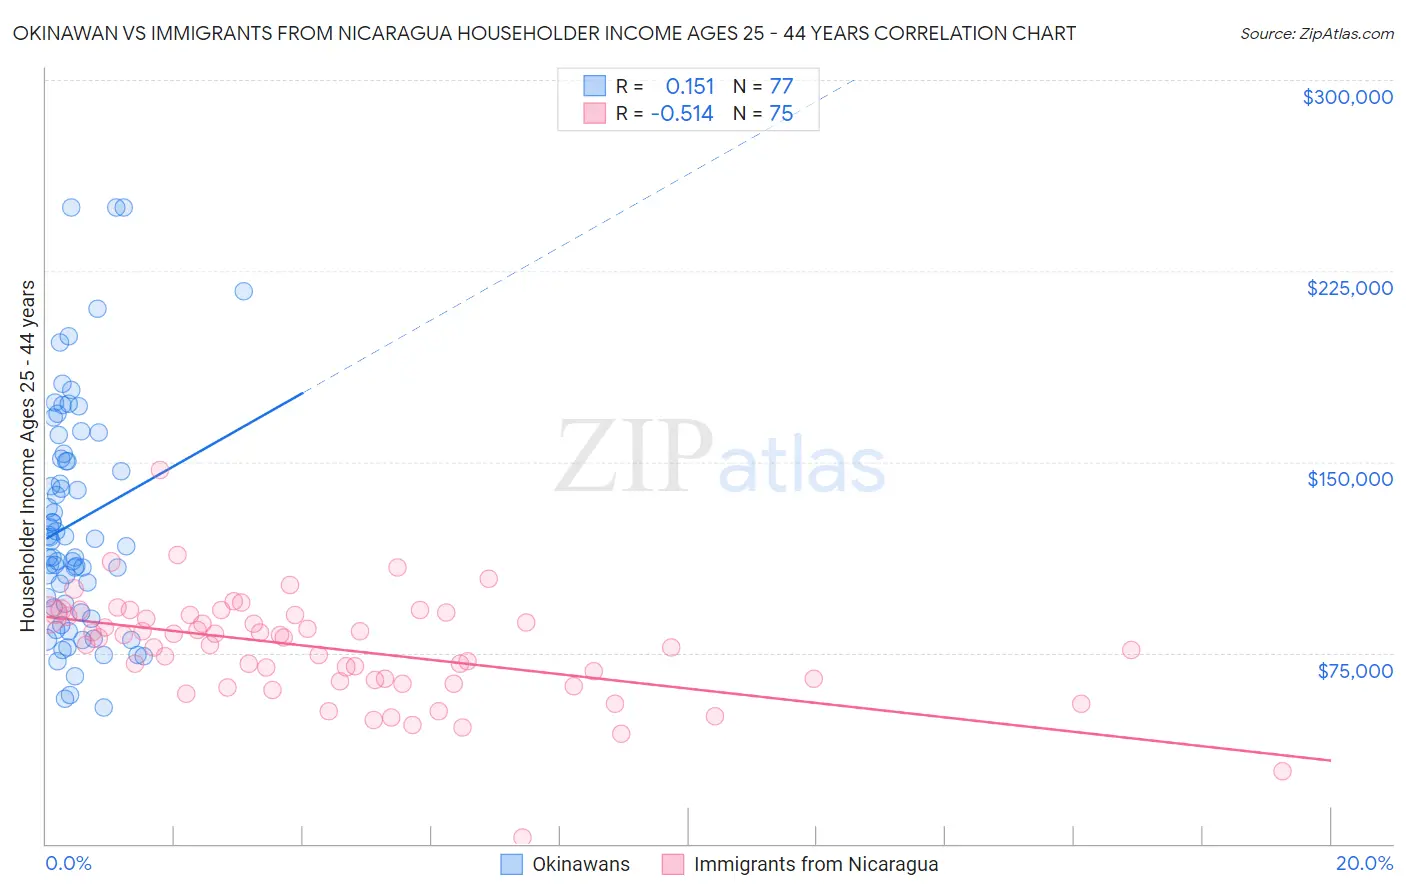 Okinawan vs Immigrants from Nicaragua Householder Income Ages 25 - 44 years